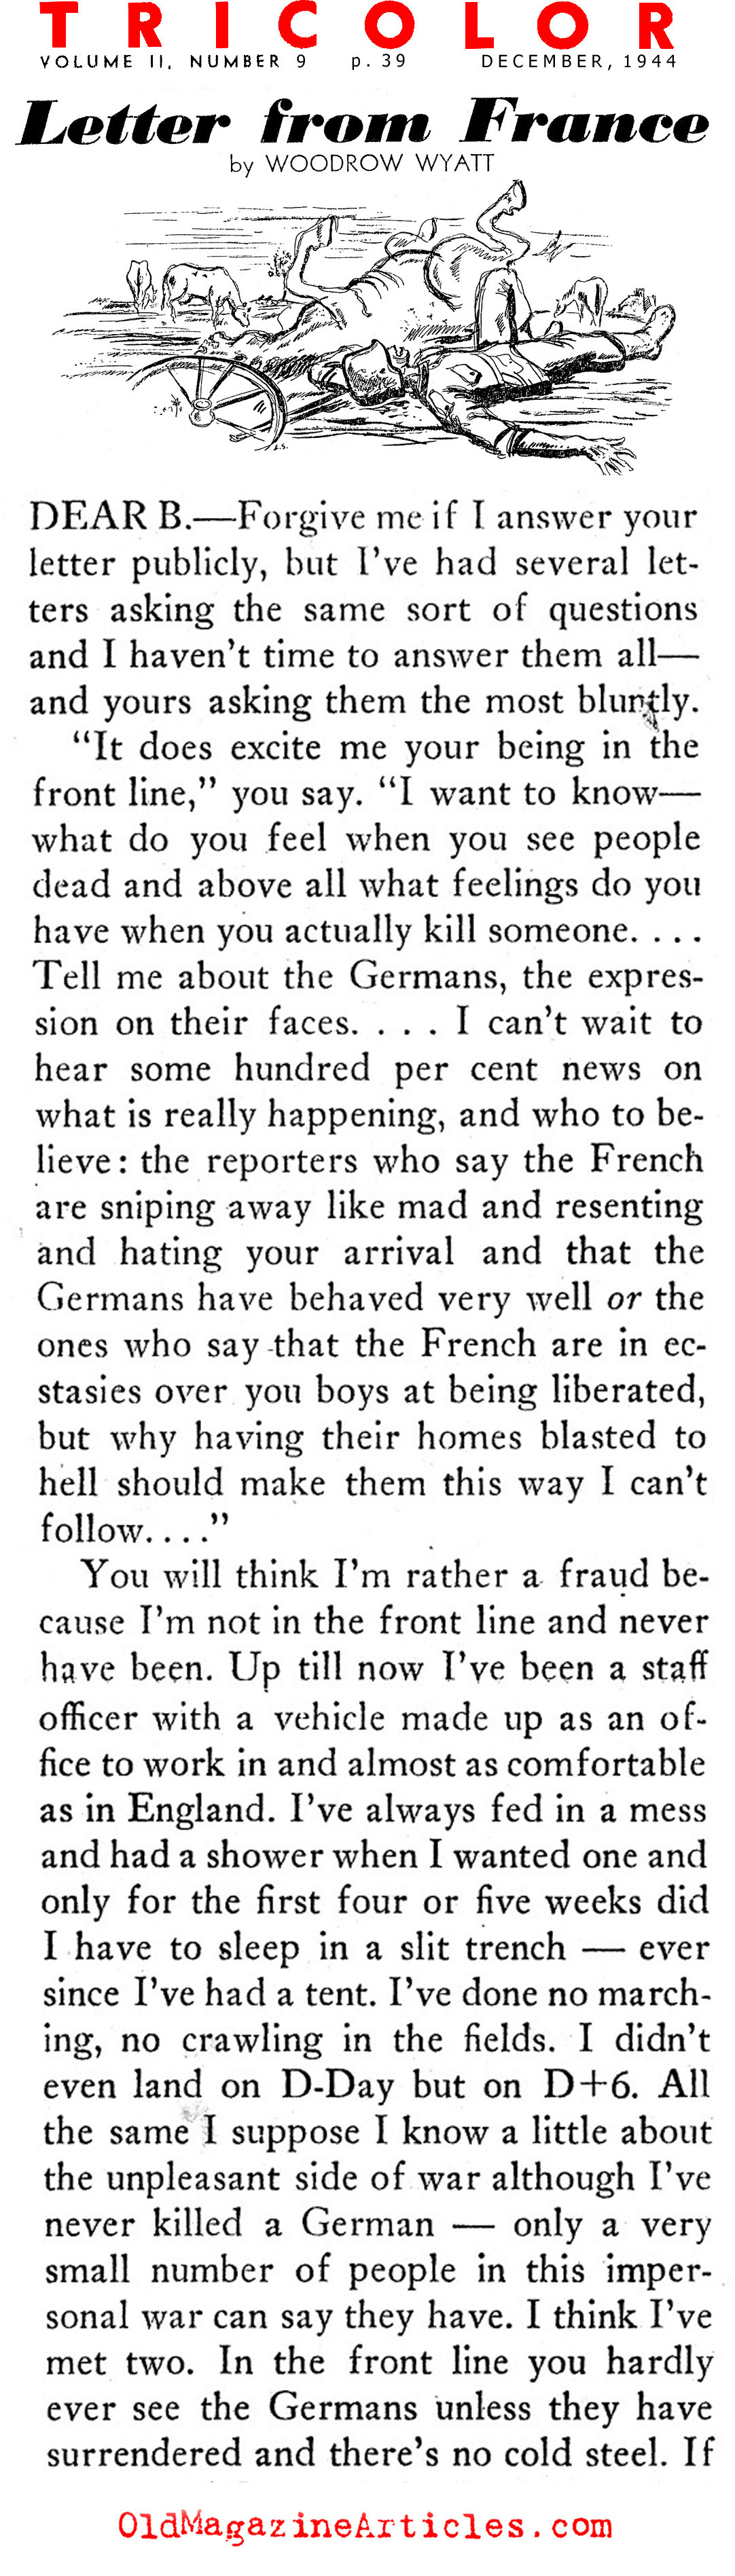 Letter from France (Tricolor Magazine, 1944) 